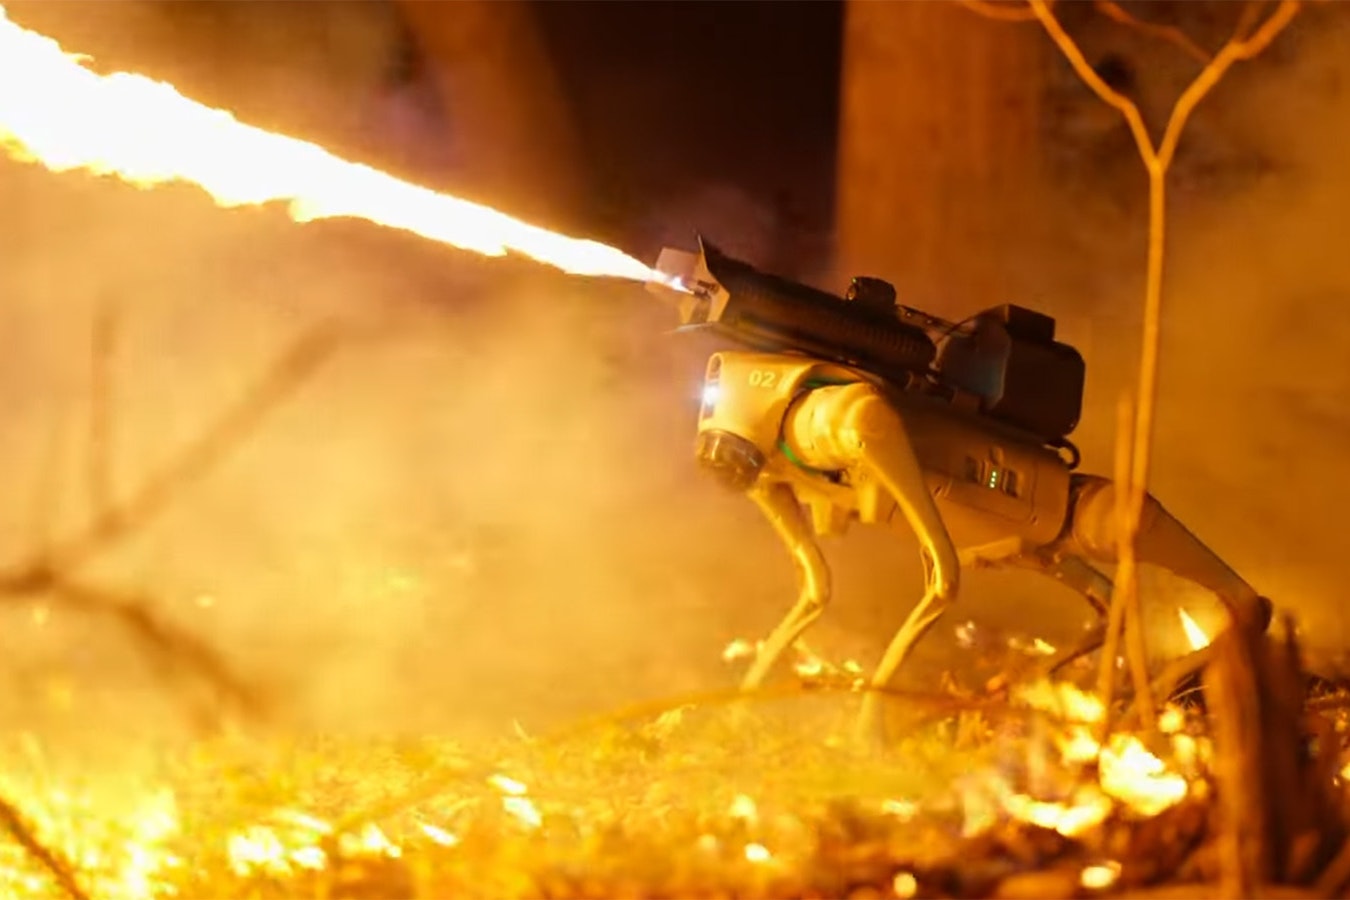 The newest creation of Throwflame is a robot dog with a laser-guided flamethrower mounted to it.